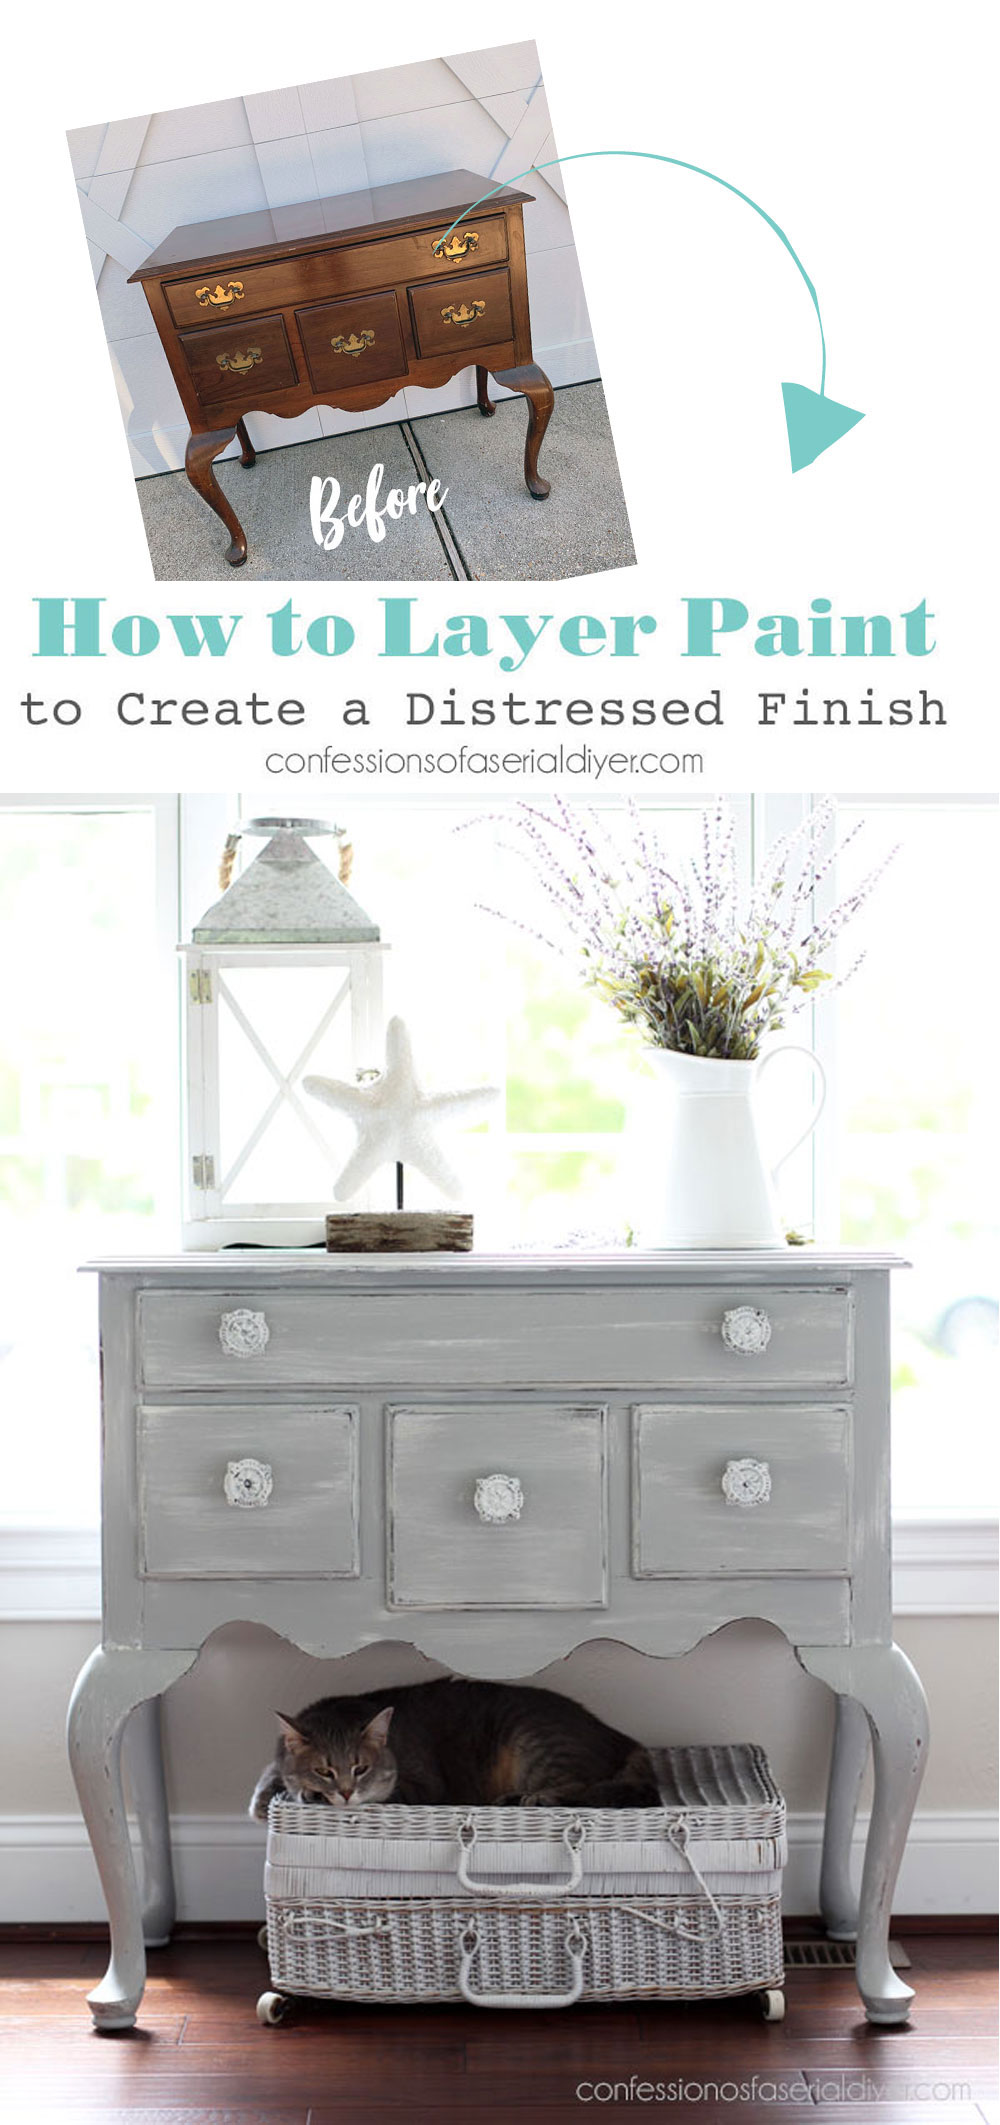 How to Layer paint for a distressed finish